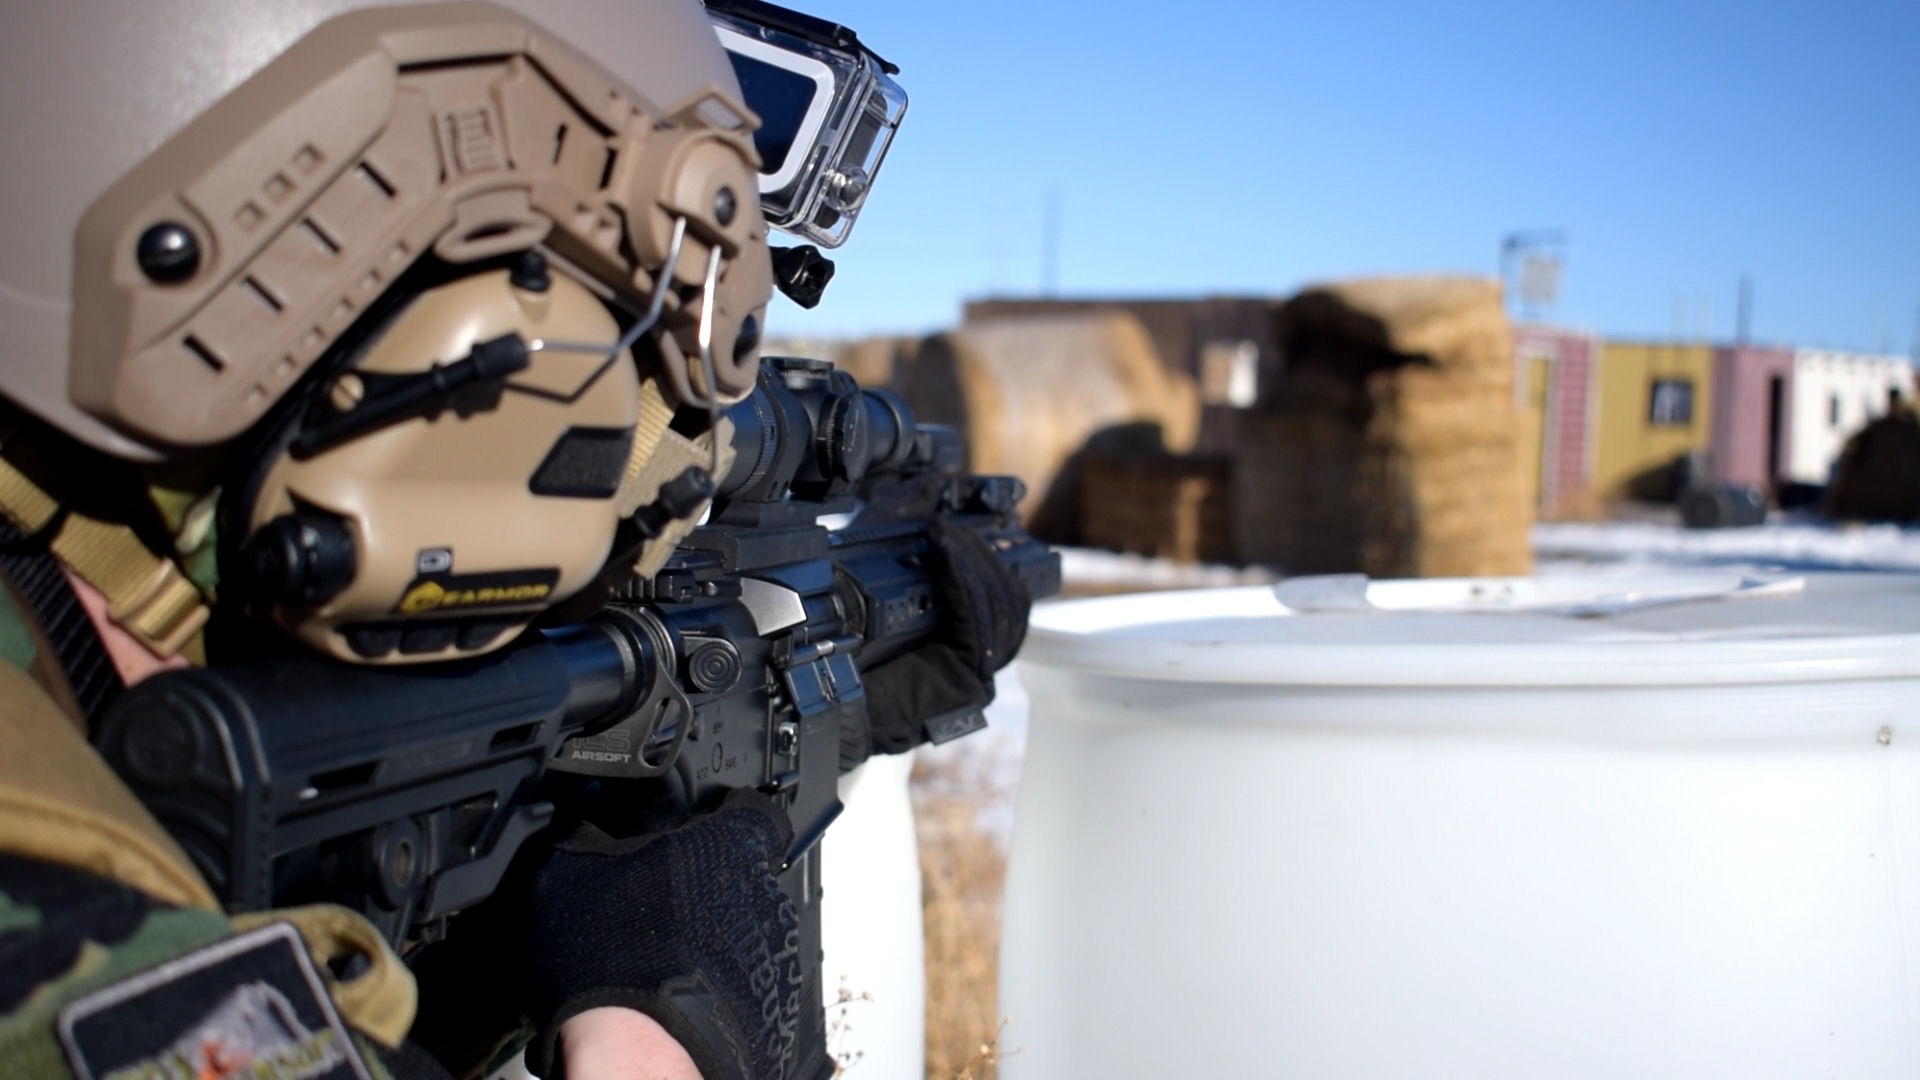 Airsoft player aiming down the sights of a rifle with an attached scope, wearing a helmet with communication gear and a mounted camera, against a backdrop of hay bales and urban buildings.